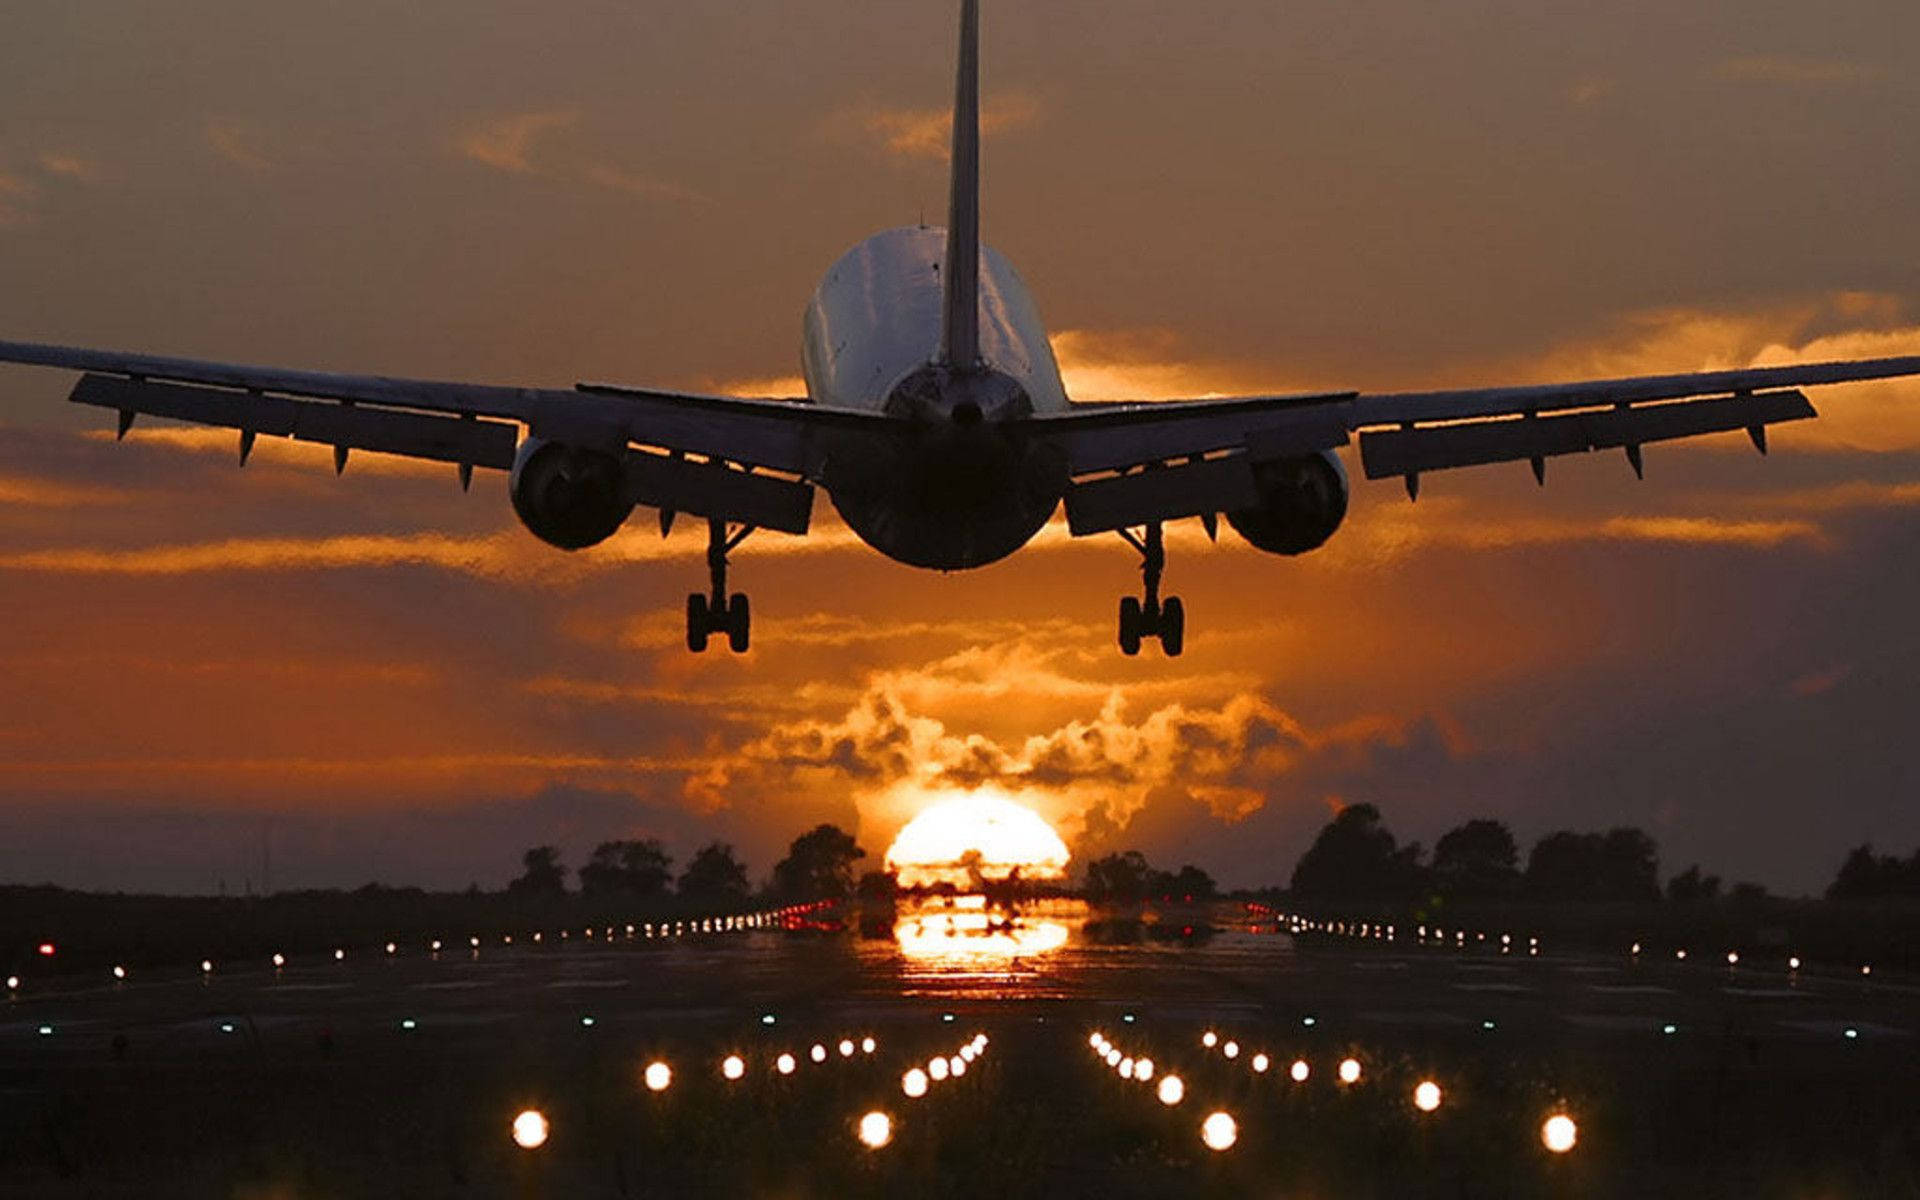 An incredible sunset view of an airplane making a final descent. Wallpaper